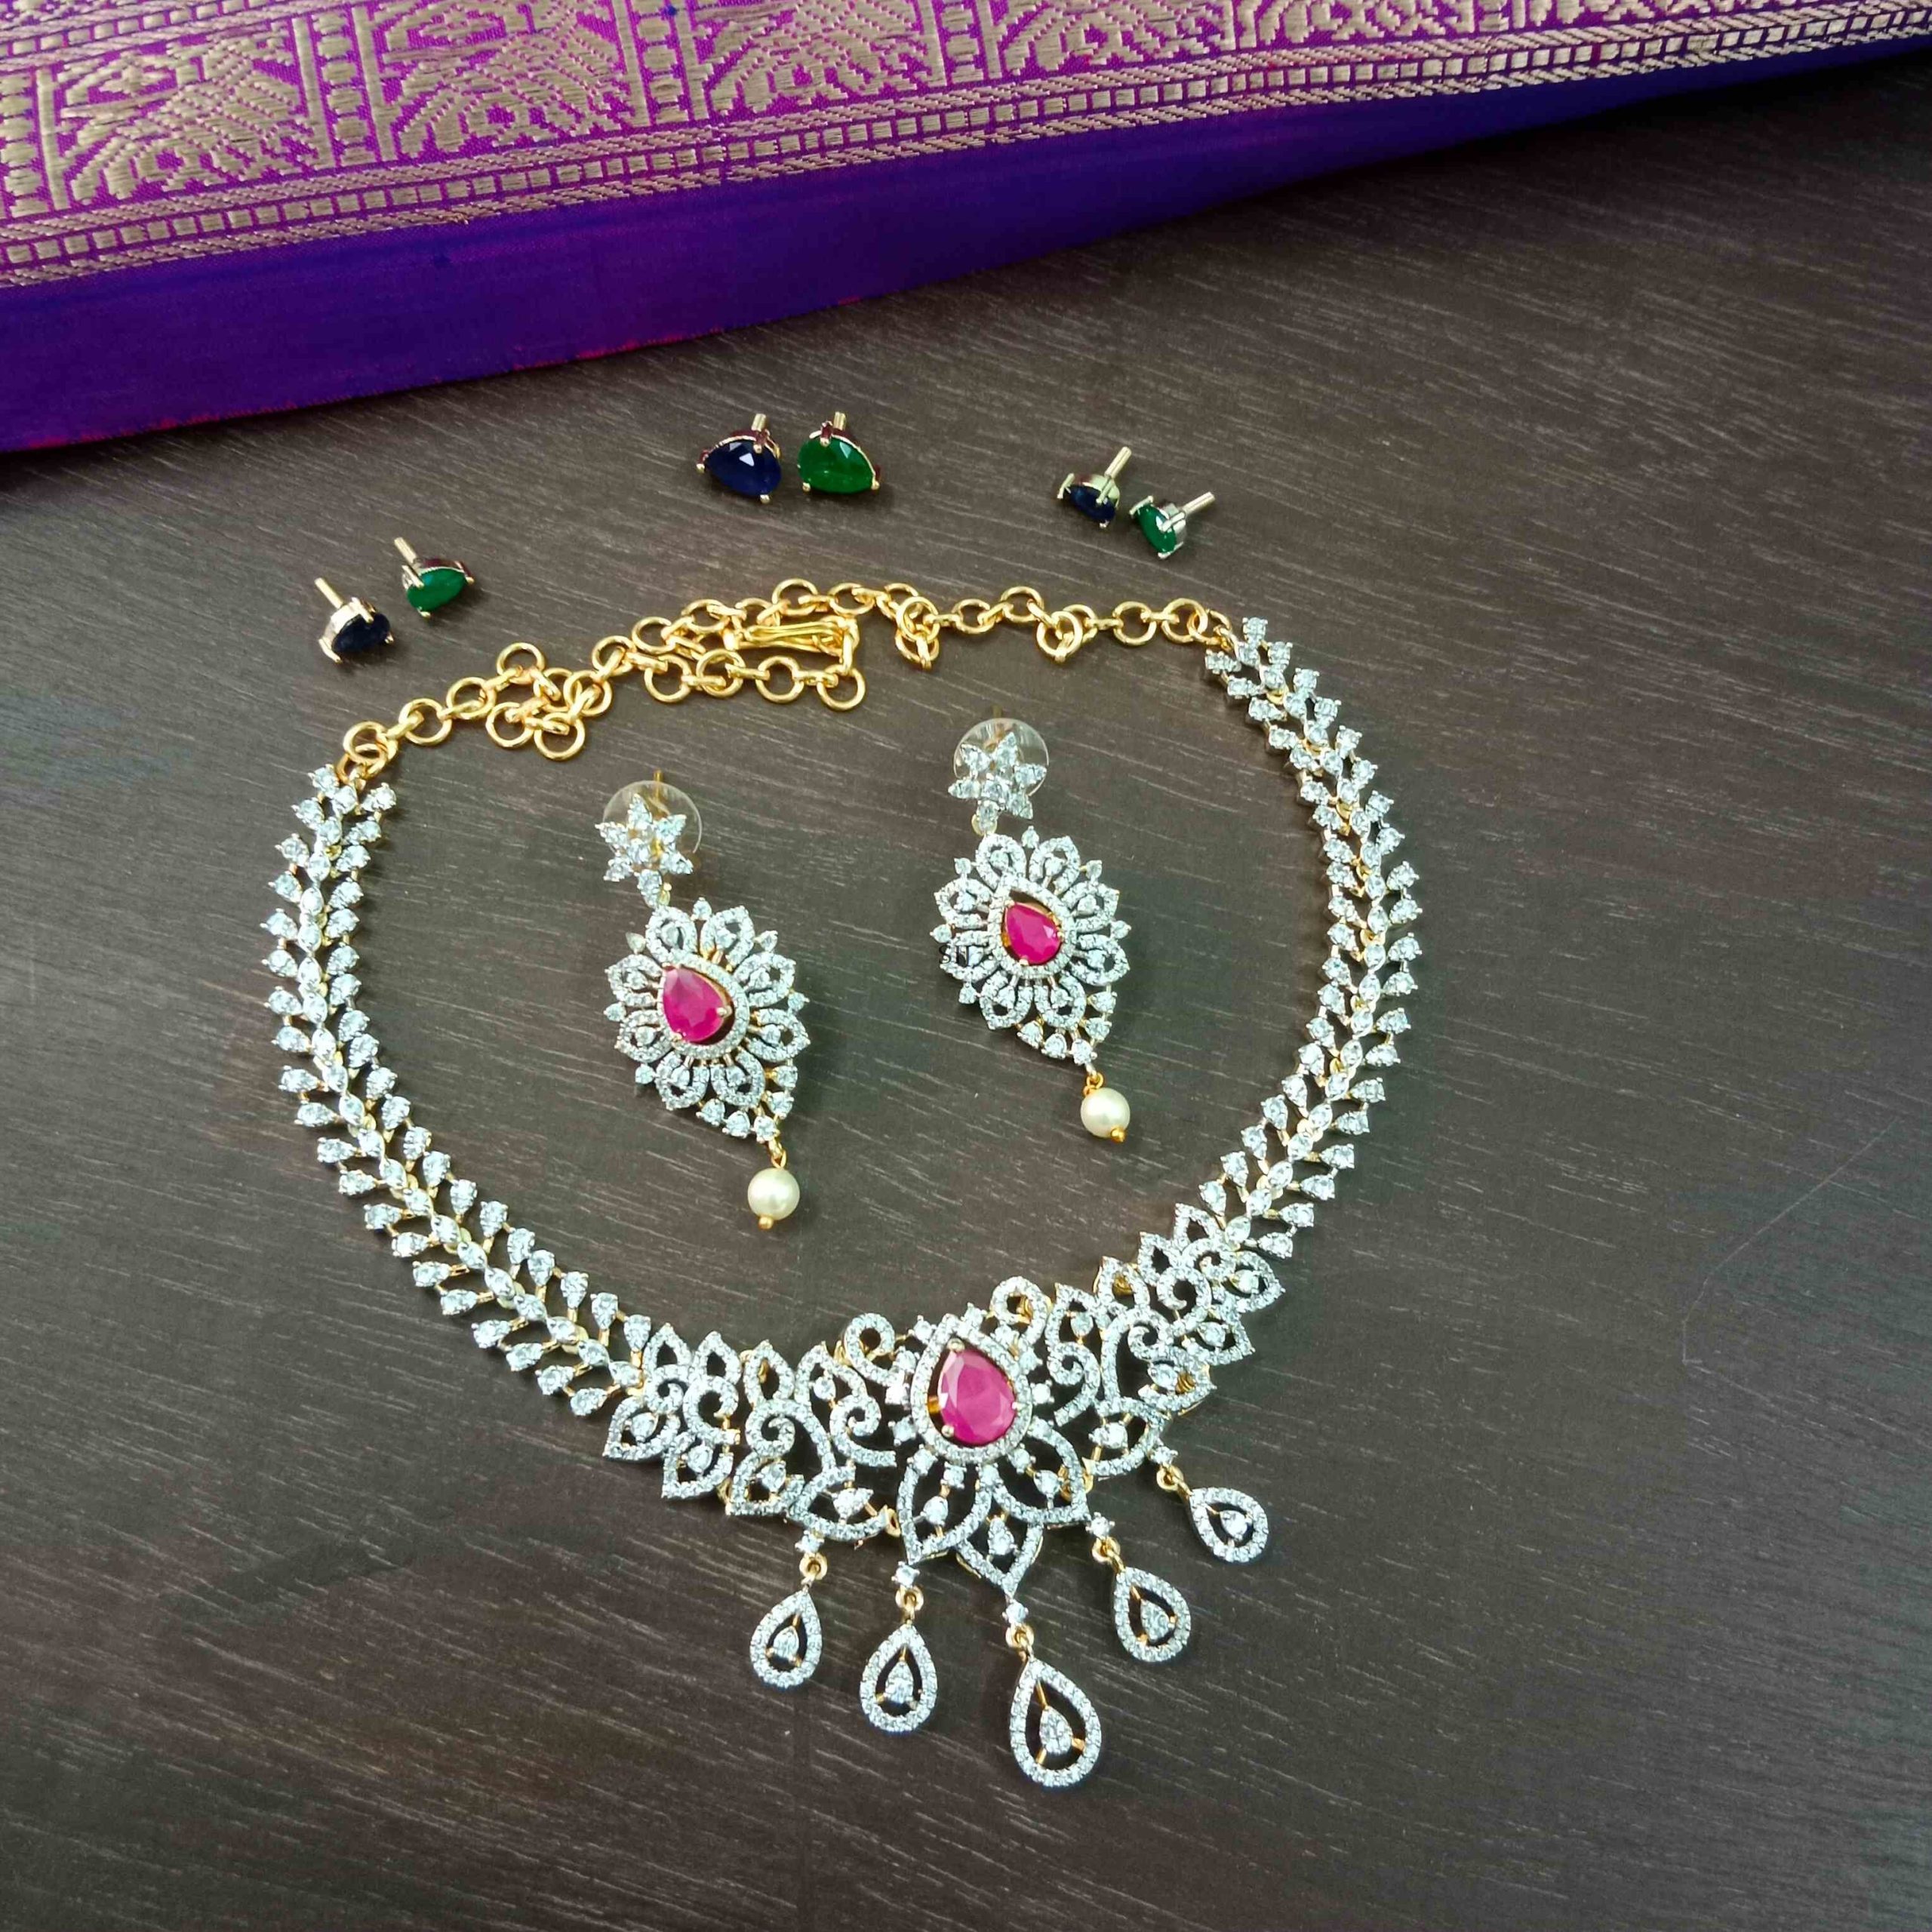 Artificial Dazzling AD Necklace With Color Changing Stones